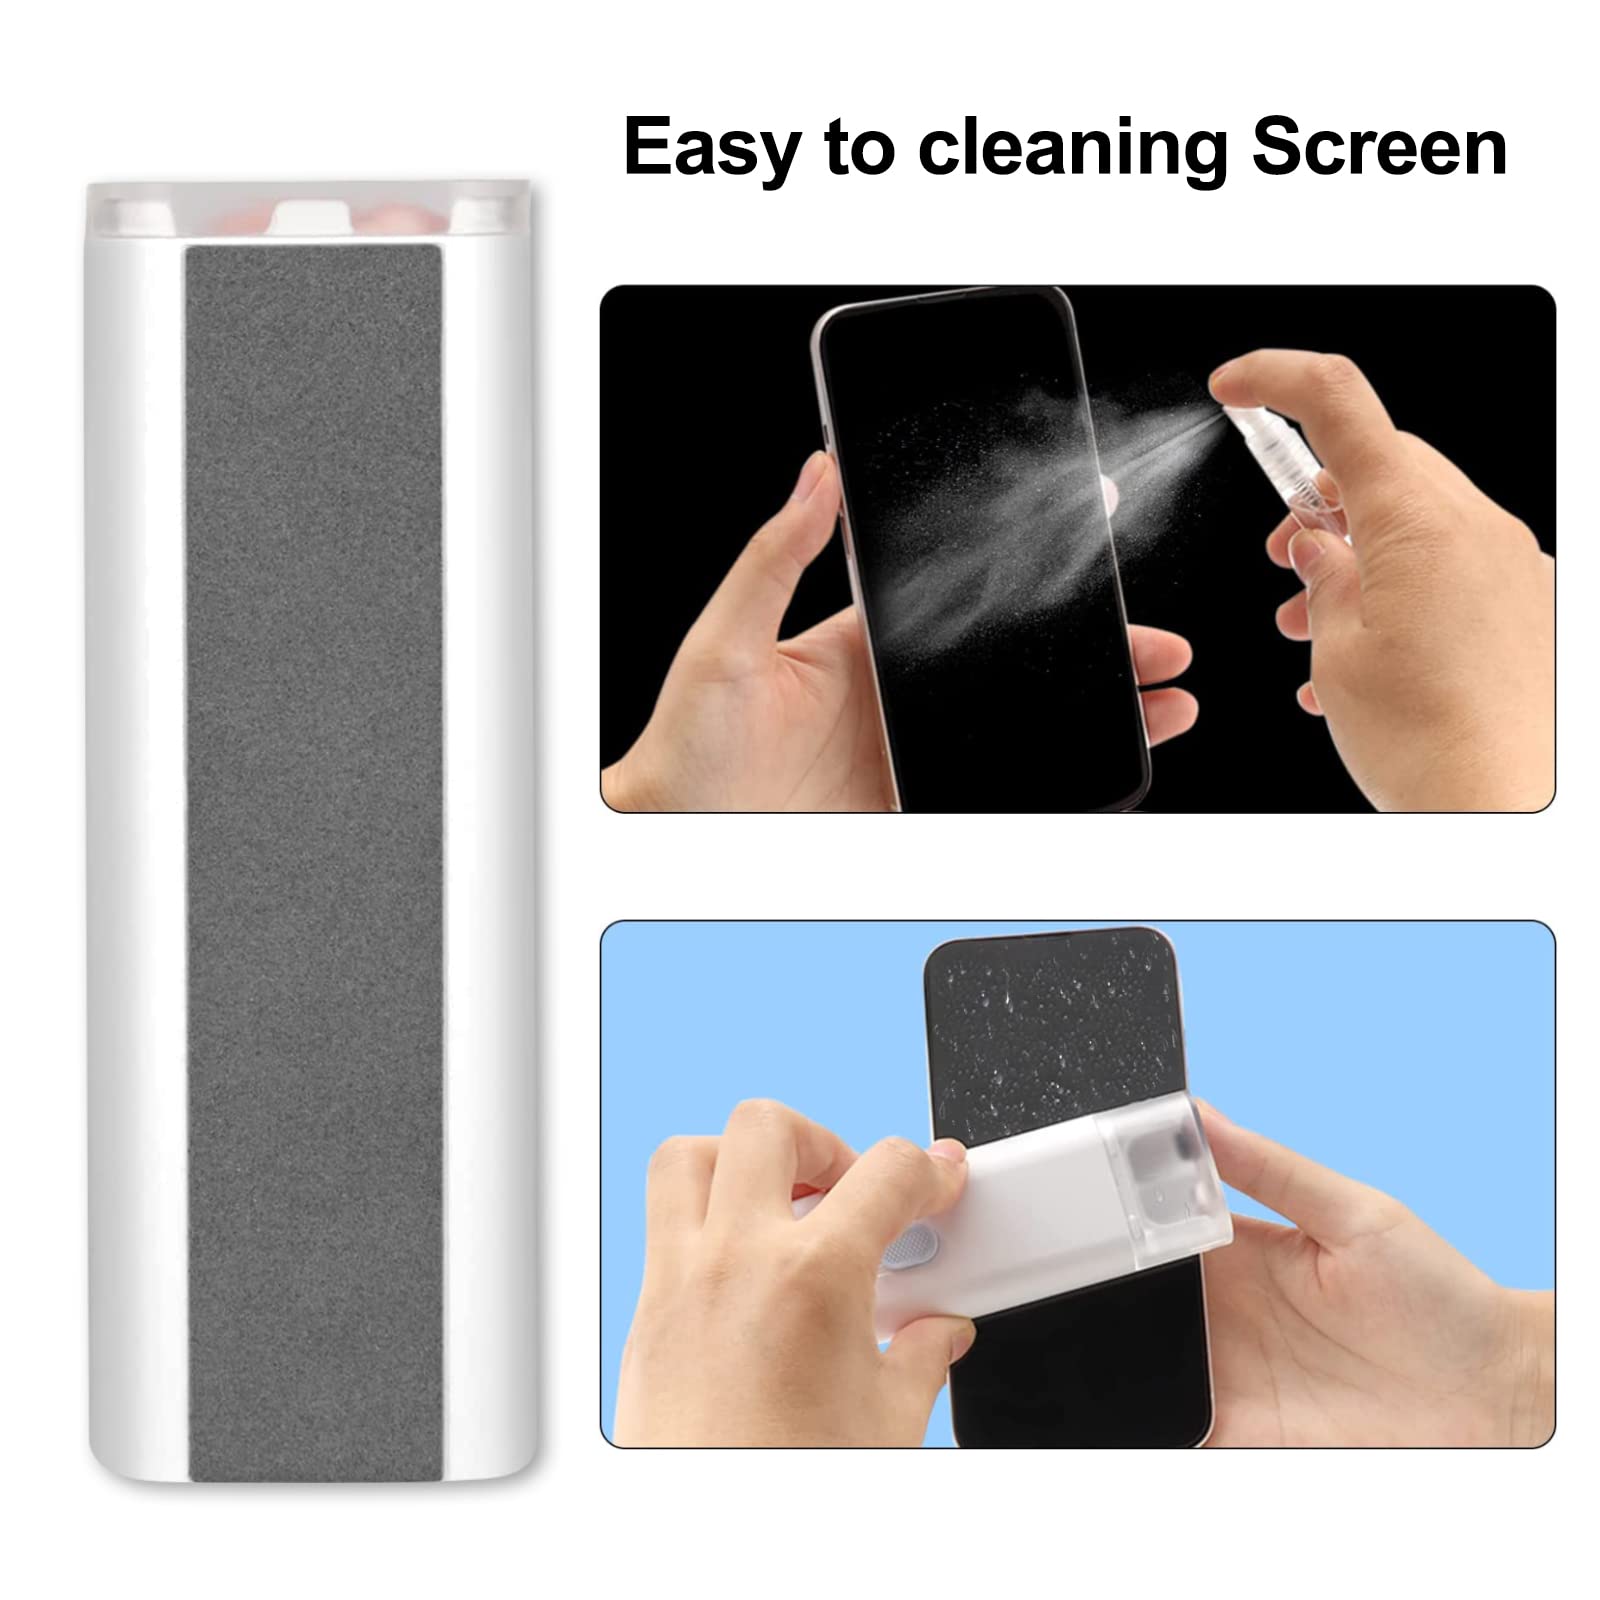 Cleaner Kit Electronic 7-in-1 ,Keyboard Cleaner,Laptop,Phone,Headset, Lego, Airpods,Camera Lens